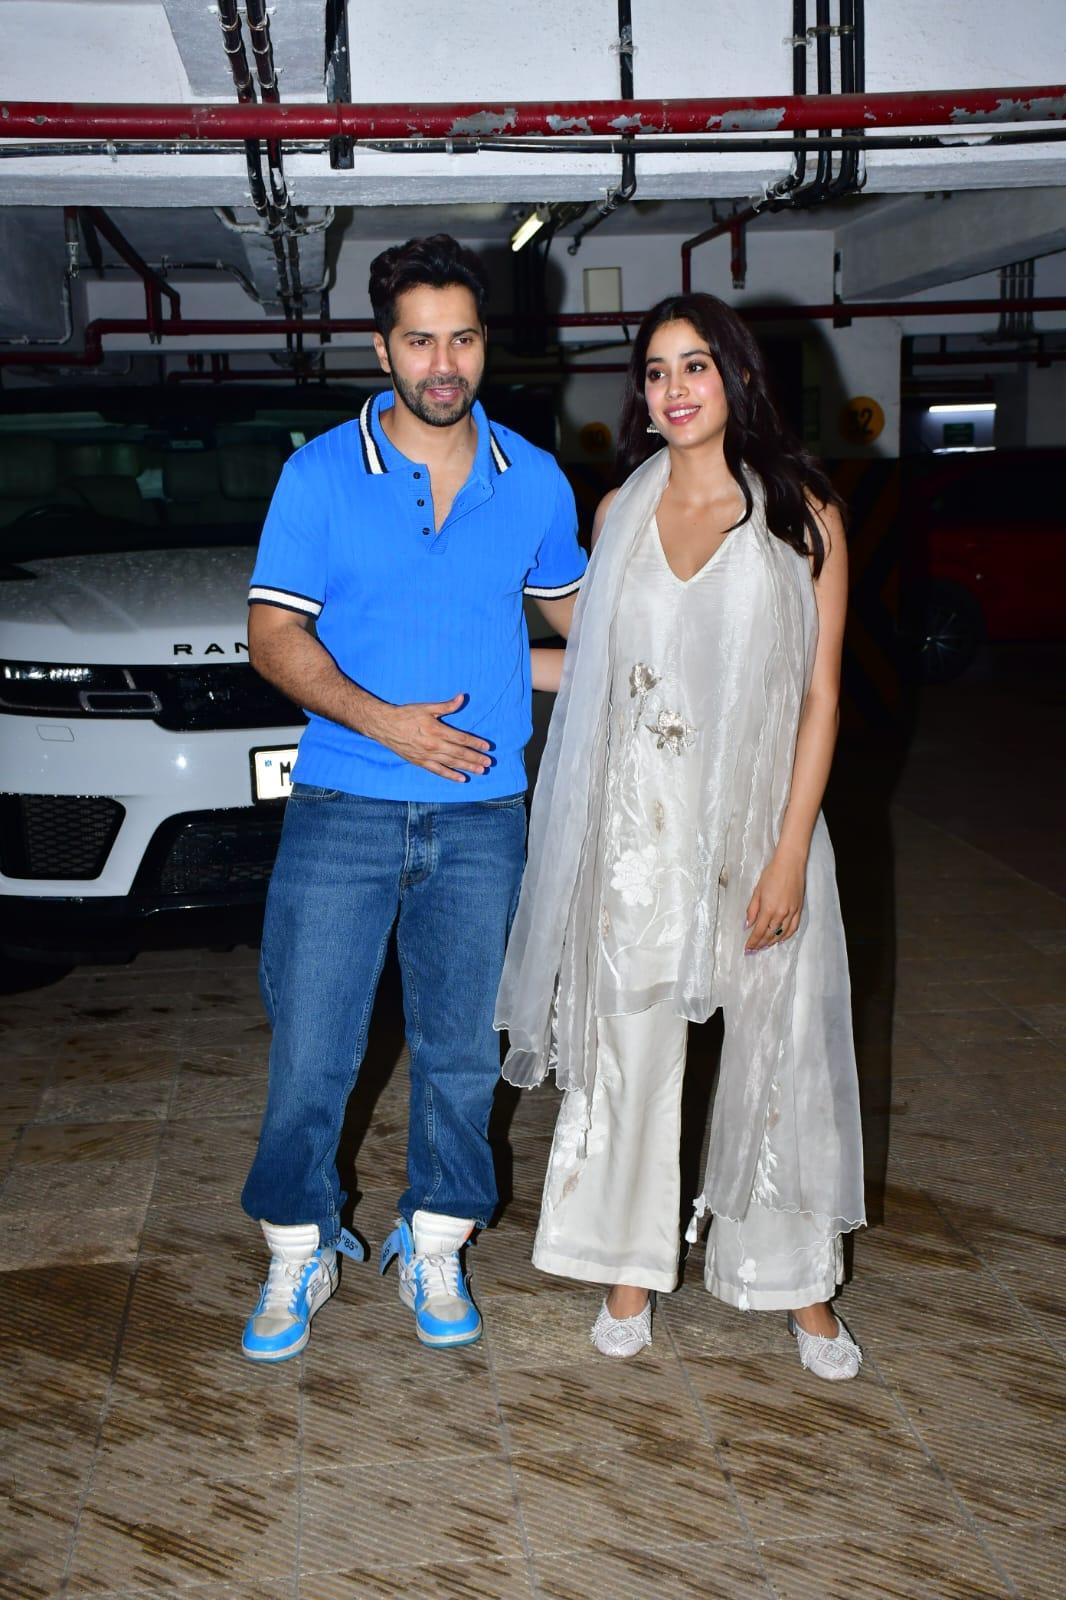 Varun and Janhvi exude happiness as the promotional activities for 'Bawaal' are in full speed